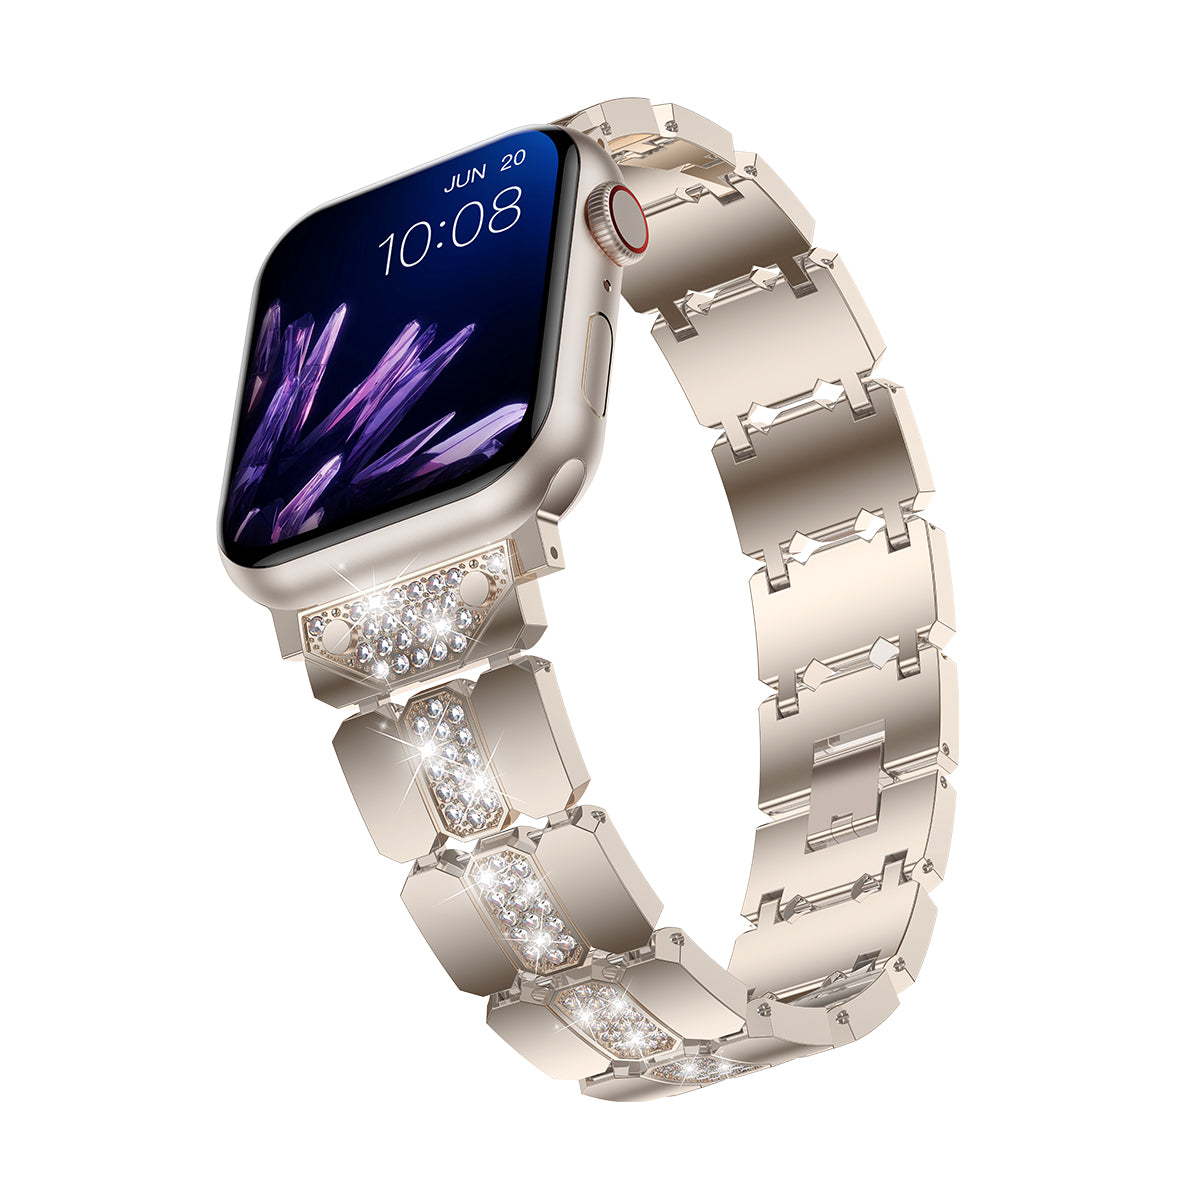 Luxury Chain Linked Bracelet with Rhinestones Apple Watch Bands for iWatch All Series